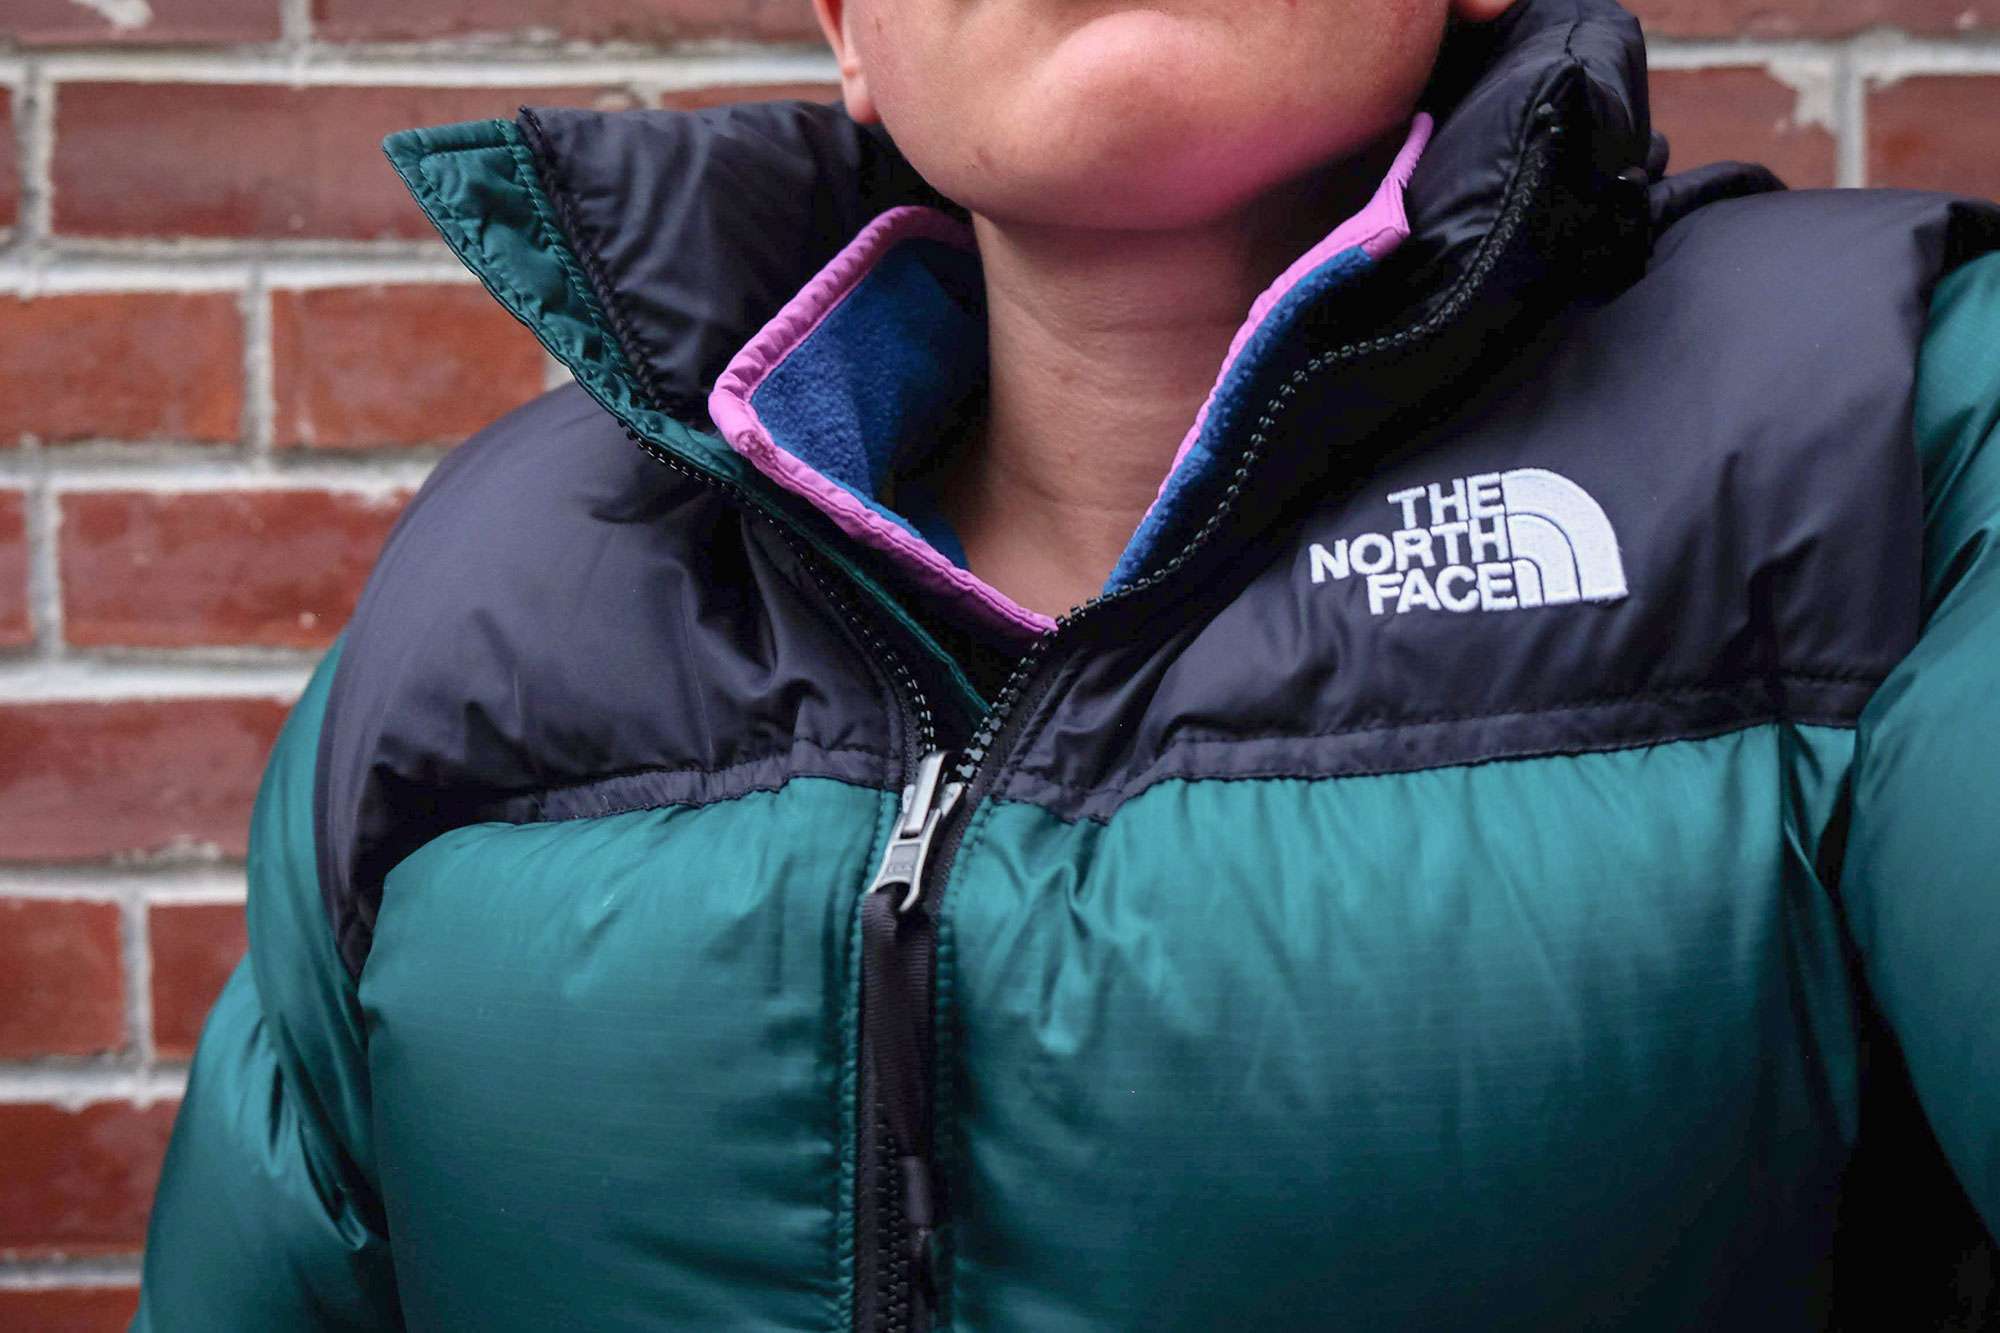 north face summit series 700 down jacket review